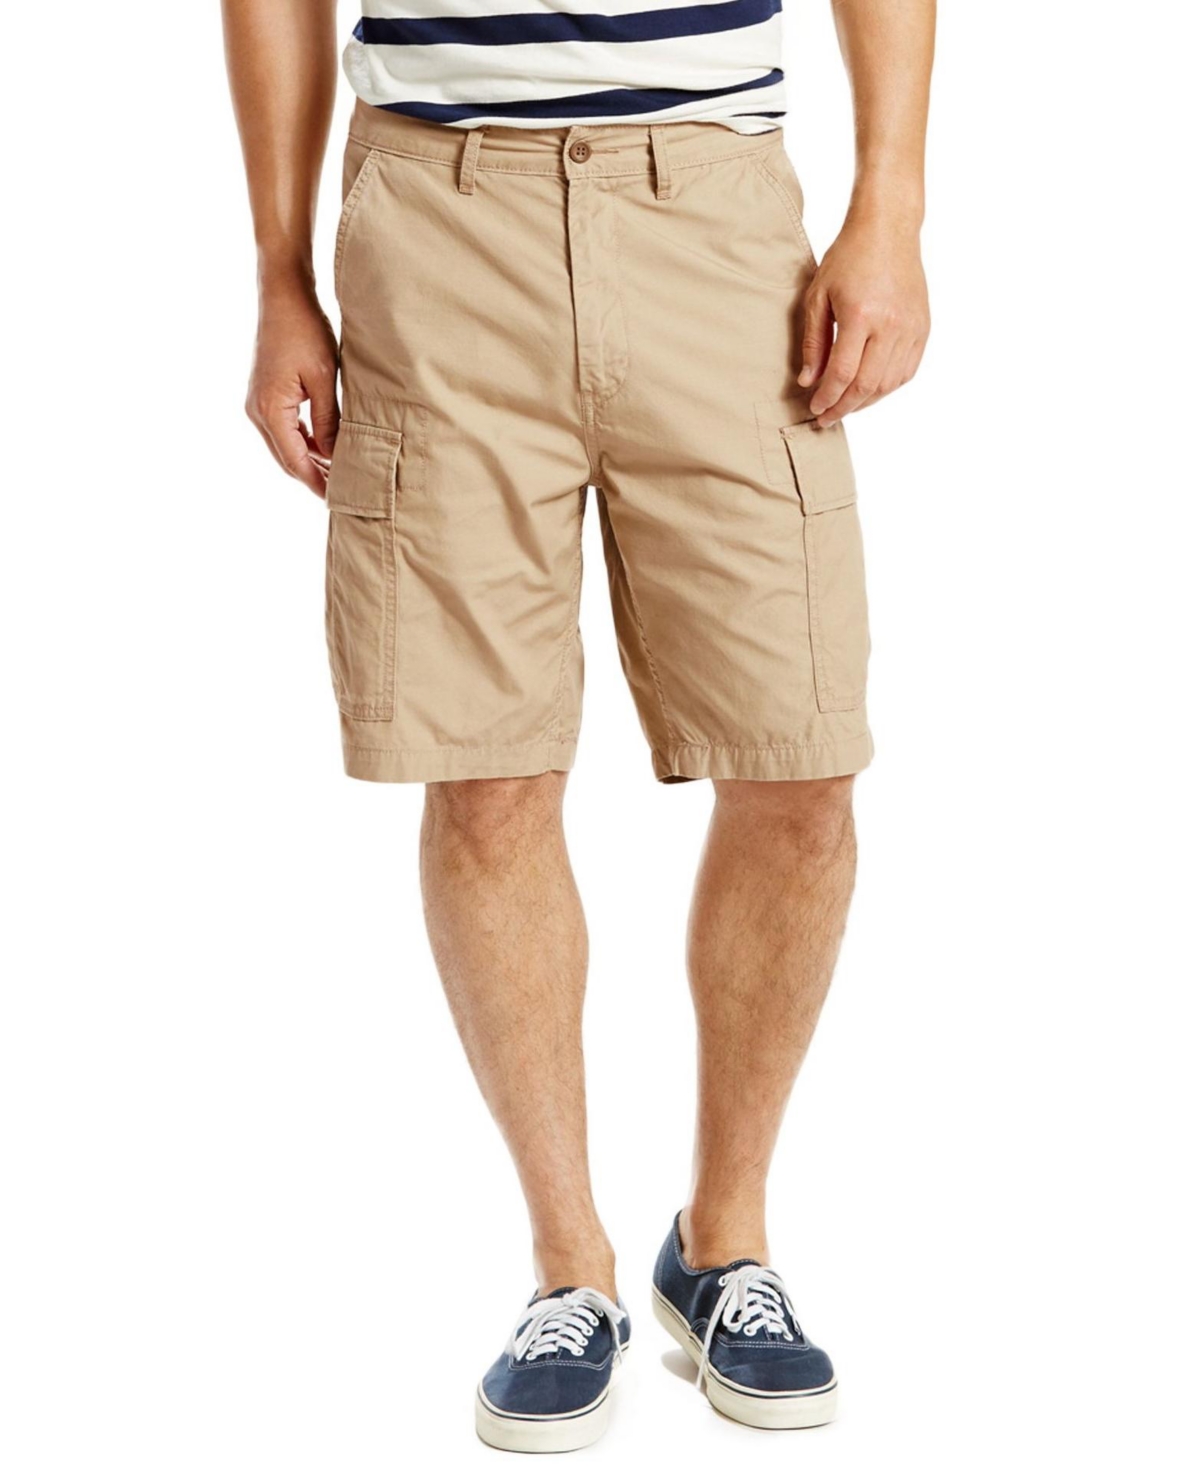 UPC 193239697292 product image for Levi's Men's Big and Tall Loose Fit Carrier Cargo Shorts | upcitemdb.com